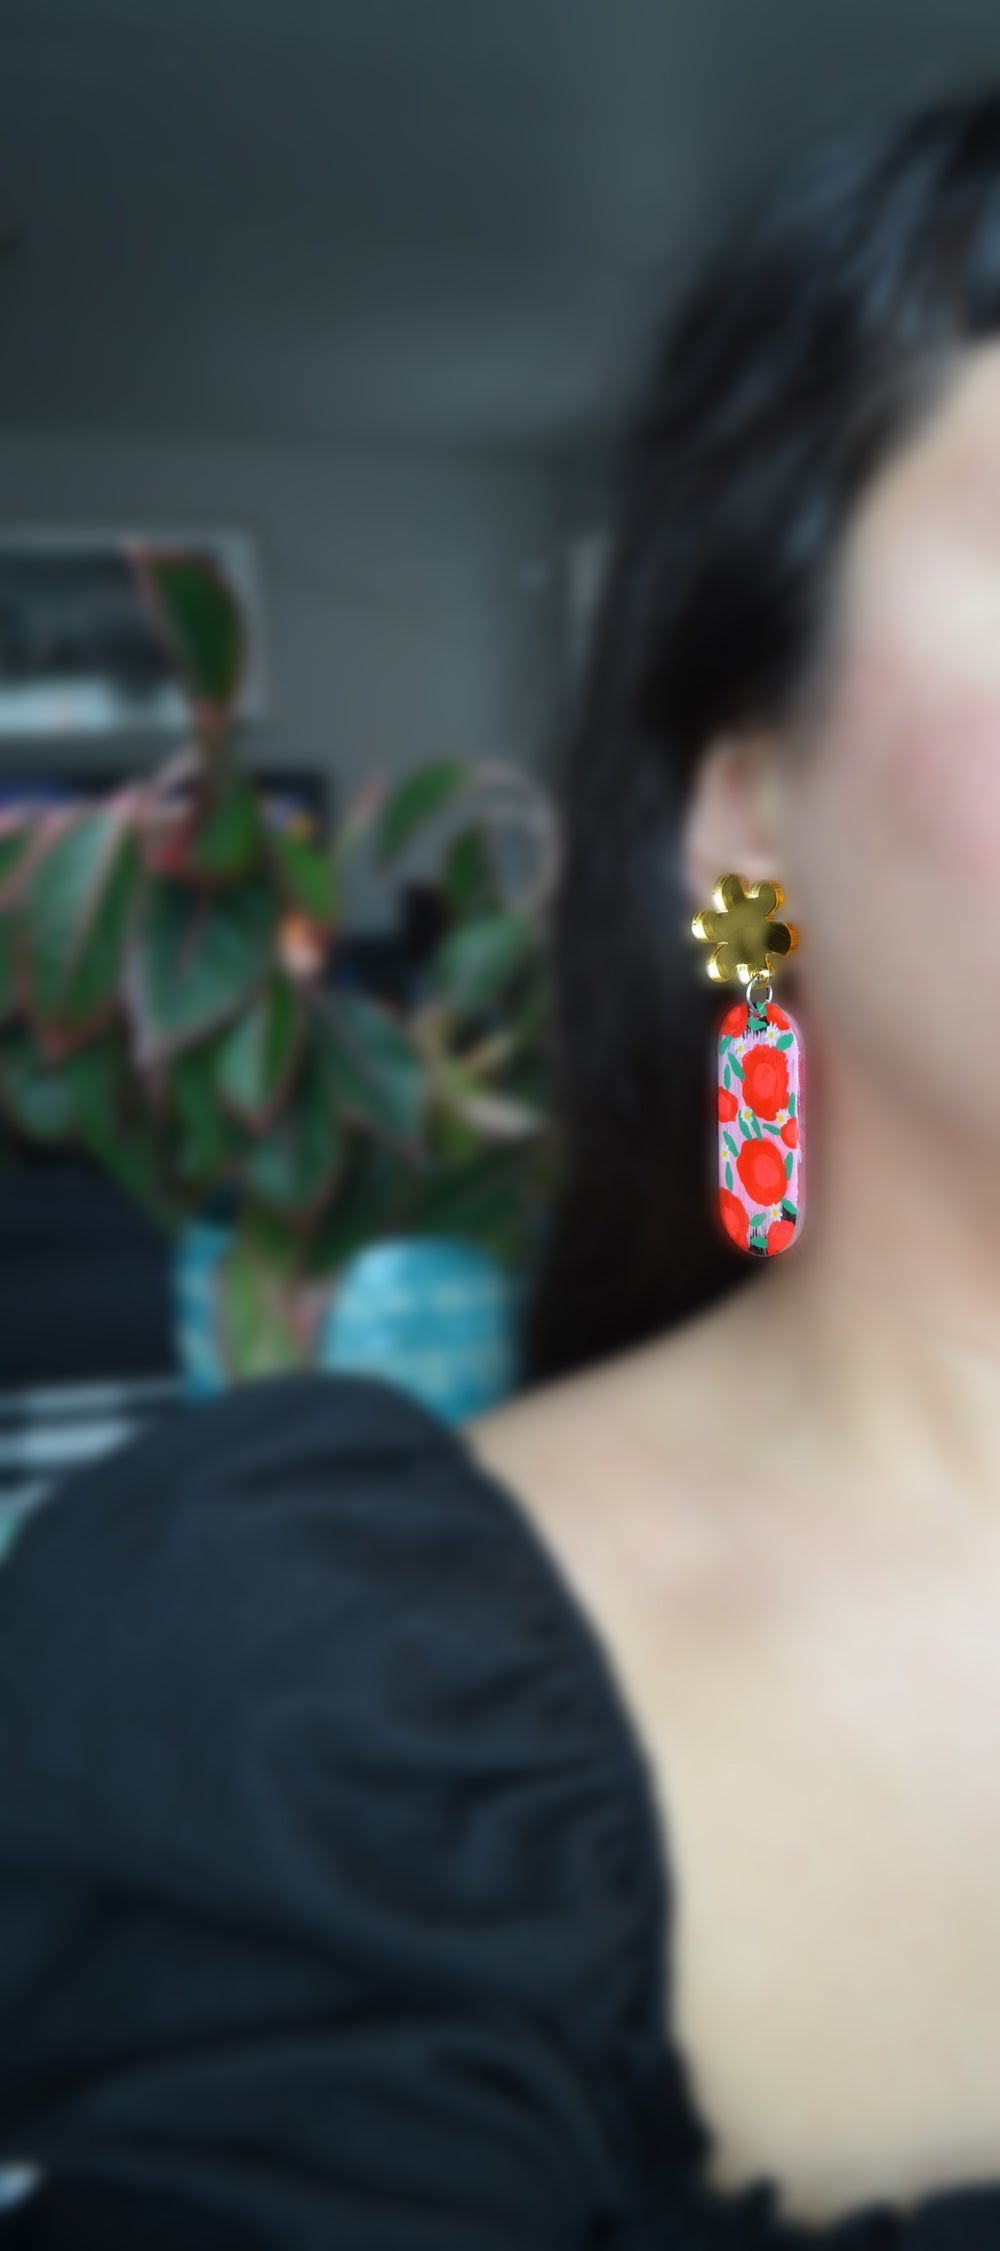 Pink and Red Flower Resin Earrings, Laser Cut Acrylic Jewelry